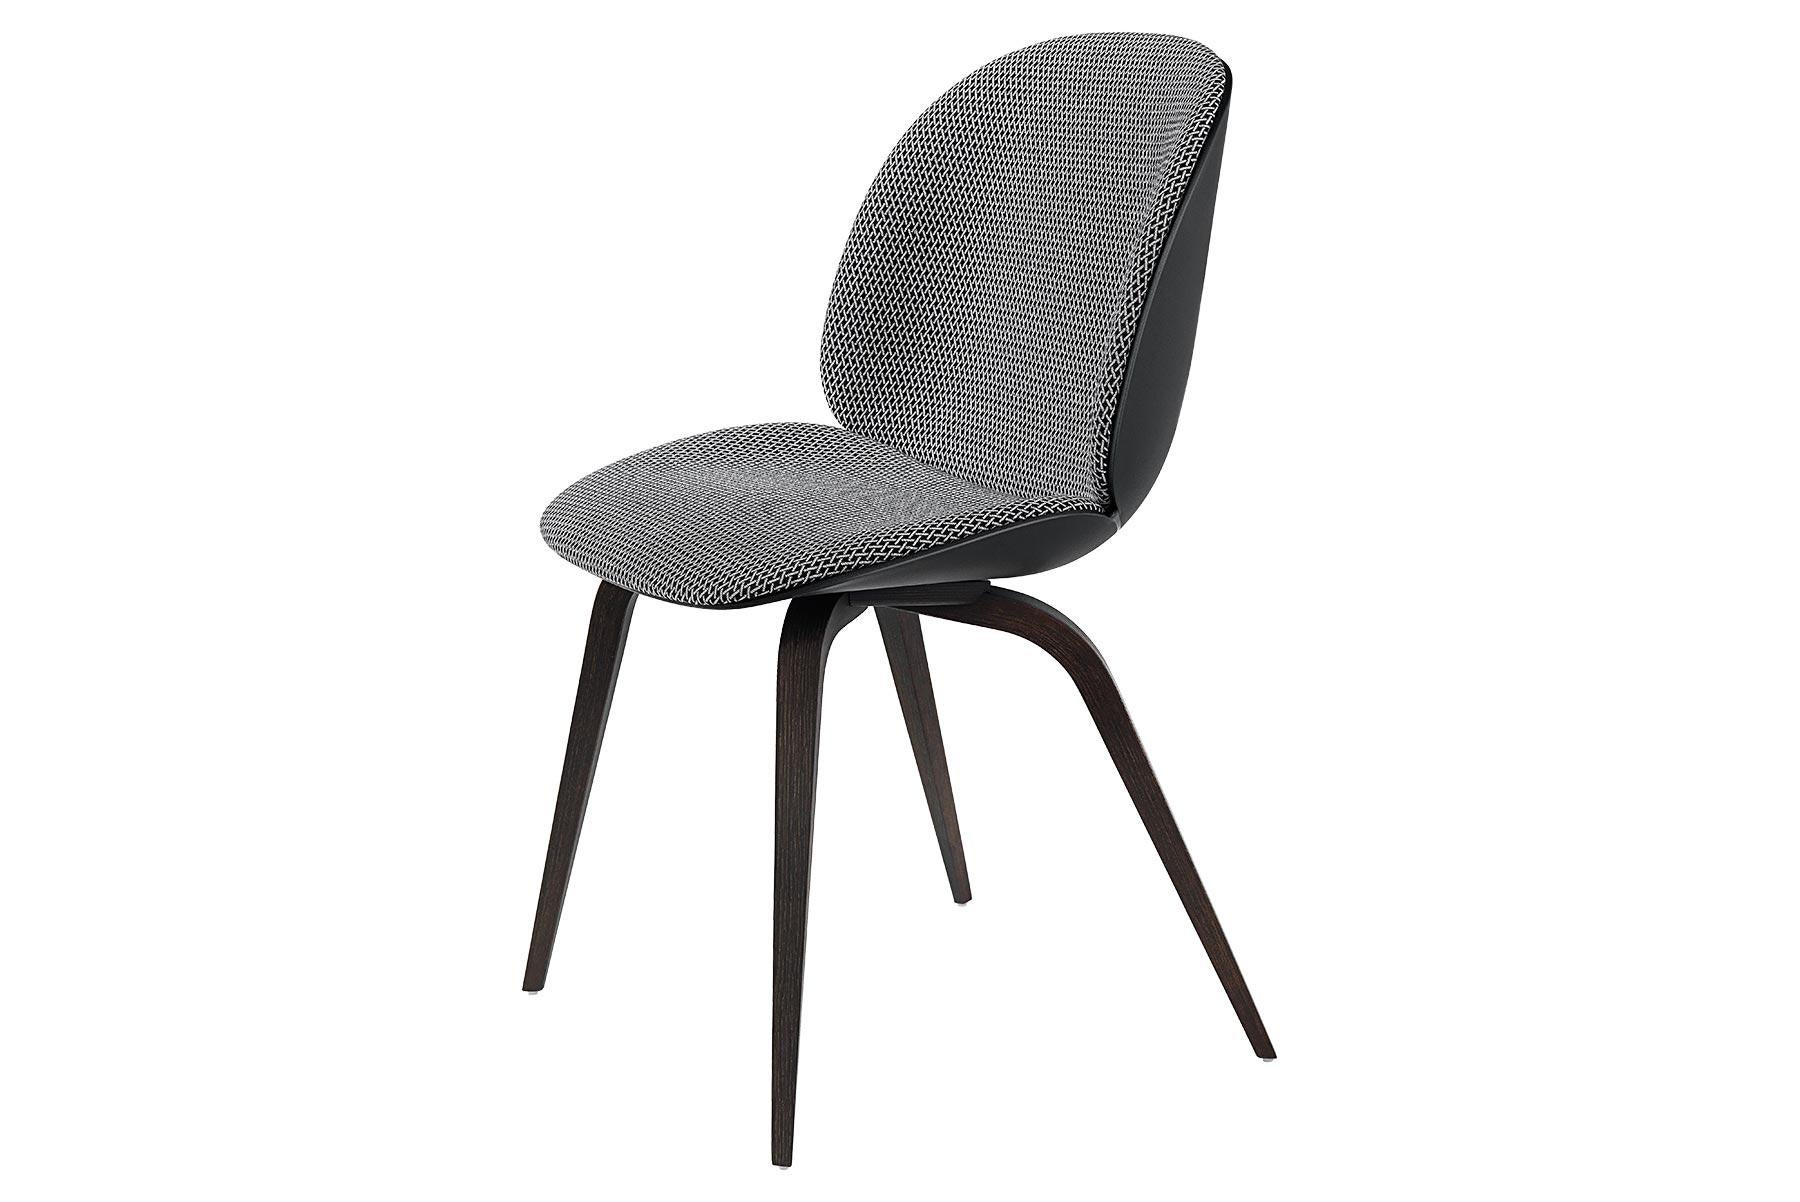 Looking closely at the anatomy of the beetle insect, characterized by its solid outside and soft inside, the front upholstered Beetle chair possesses all attributes. The front upholstered Beetle chair holds the same soft core as the fully